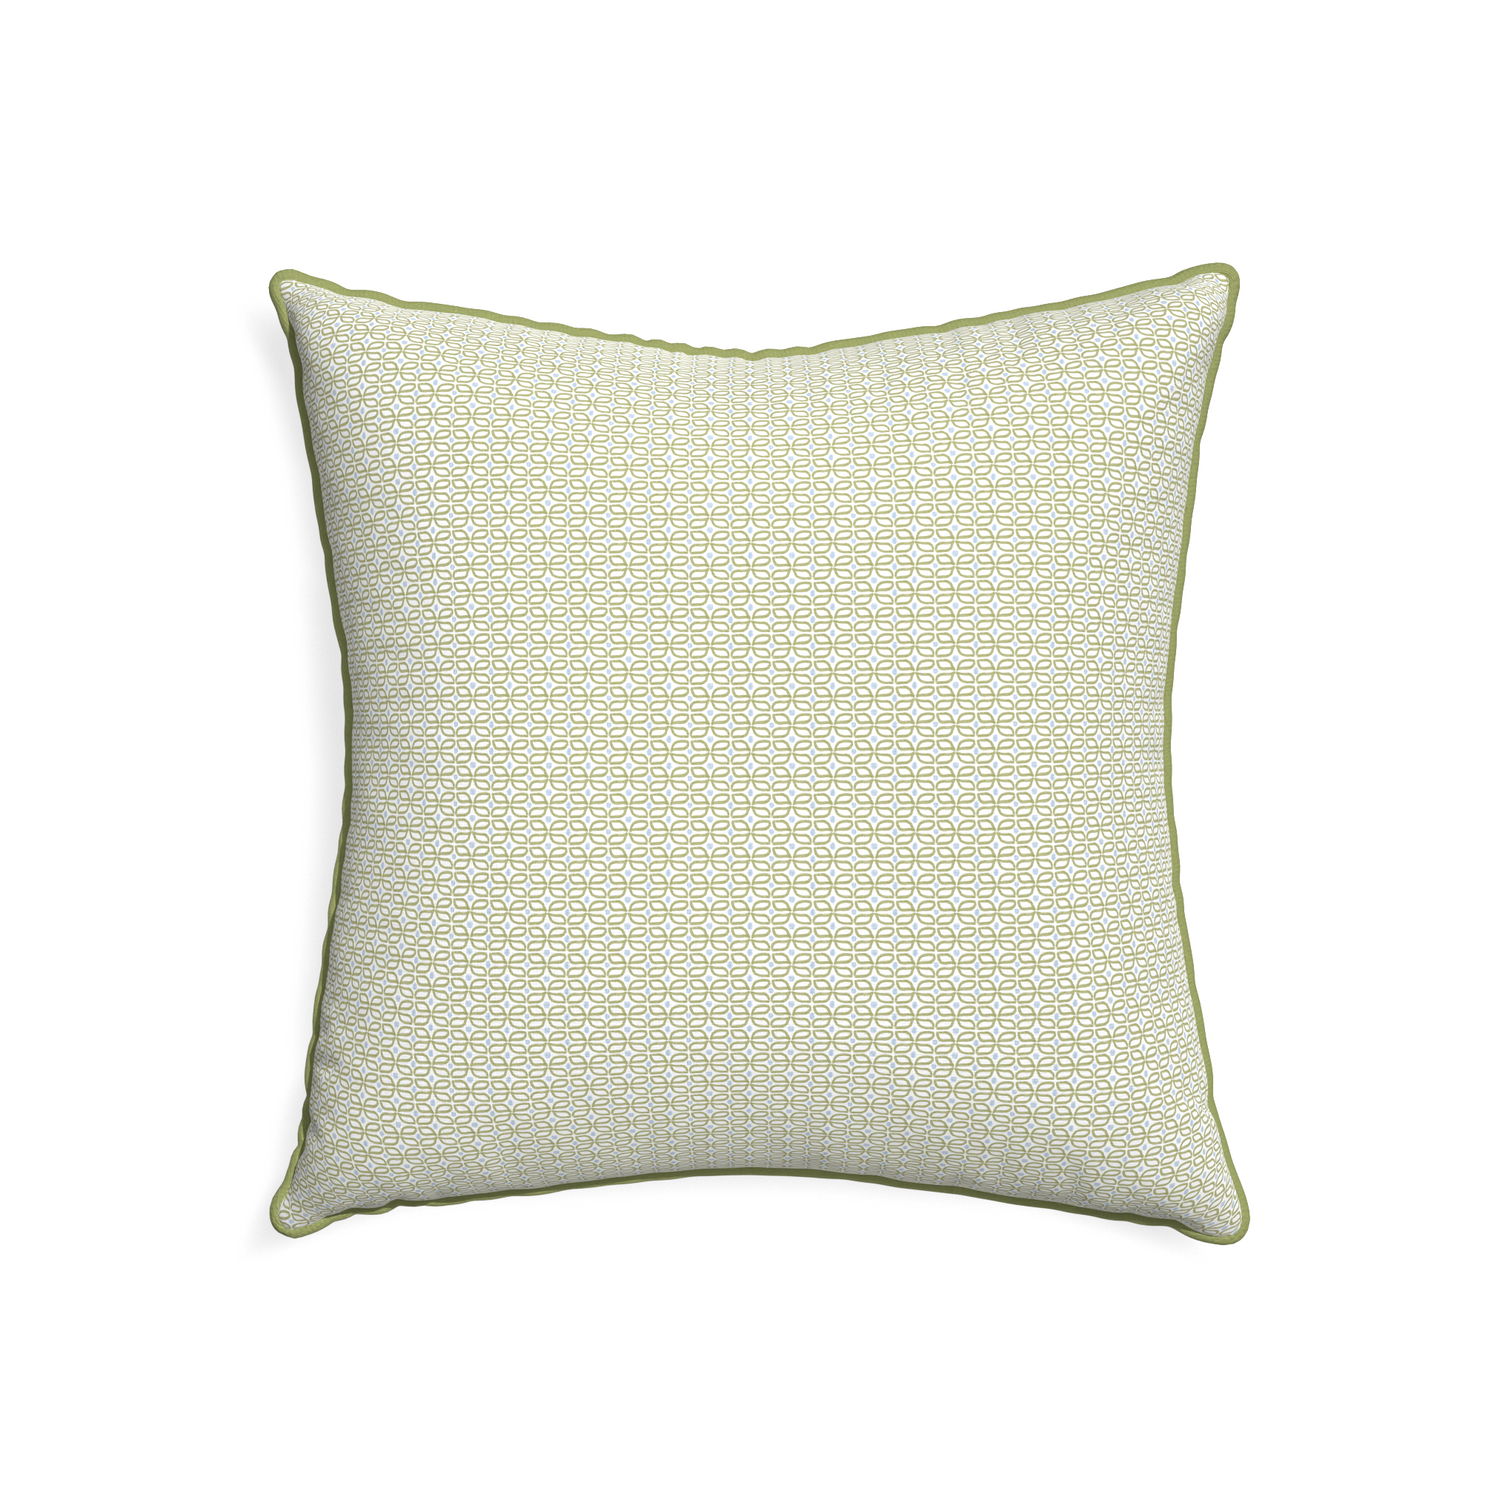 22-square loomi moss custom moss green geometricpillow with moss piping on white background